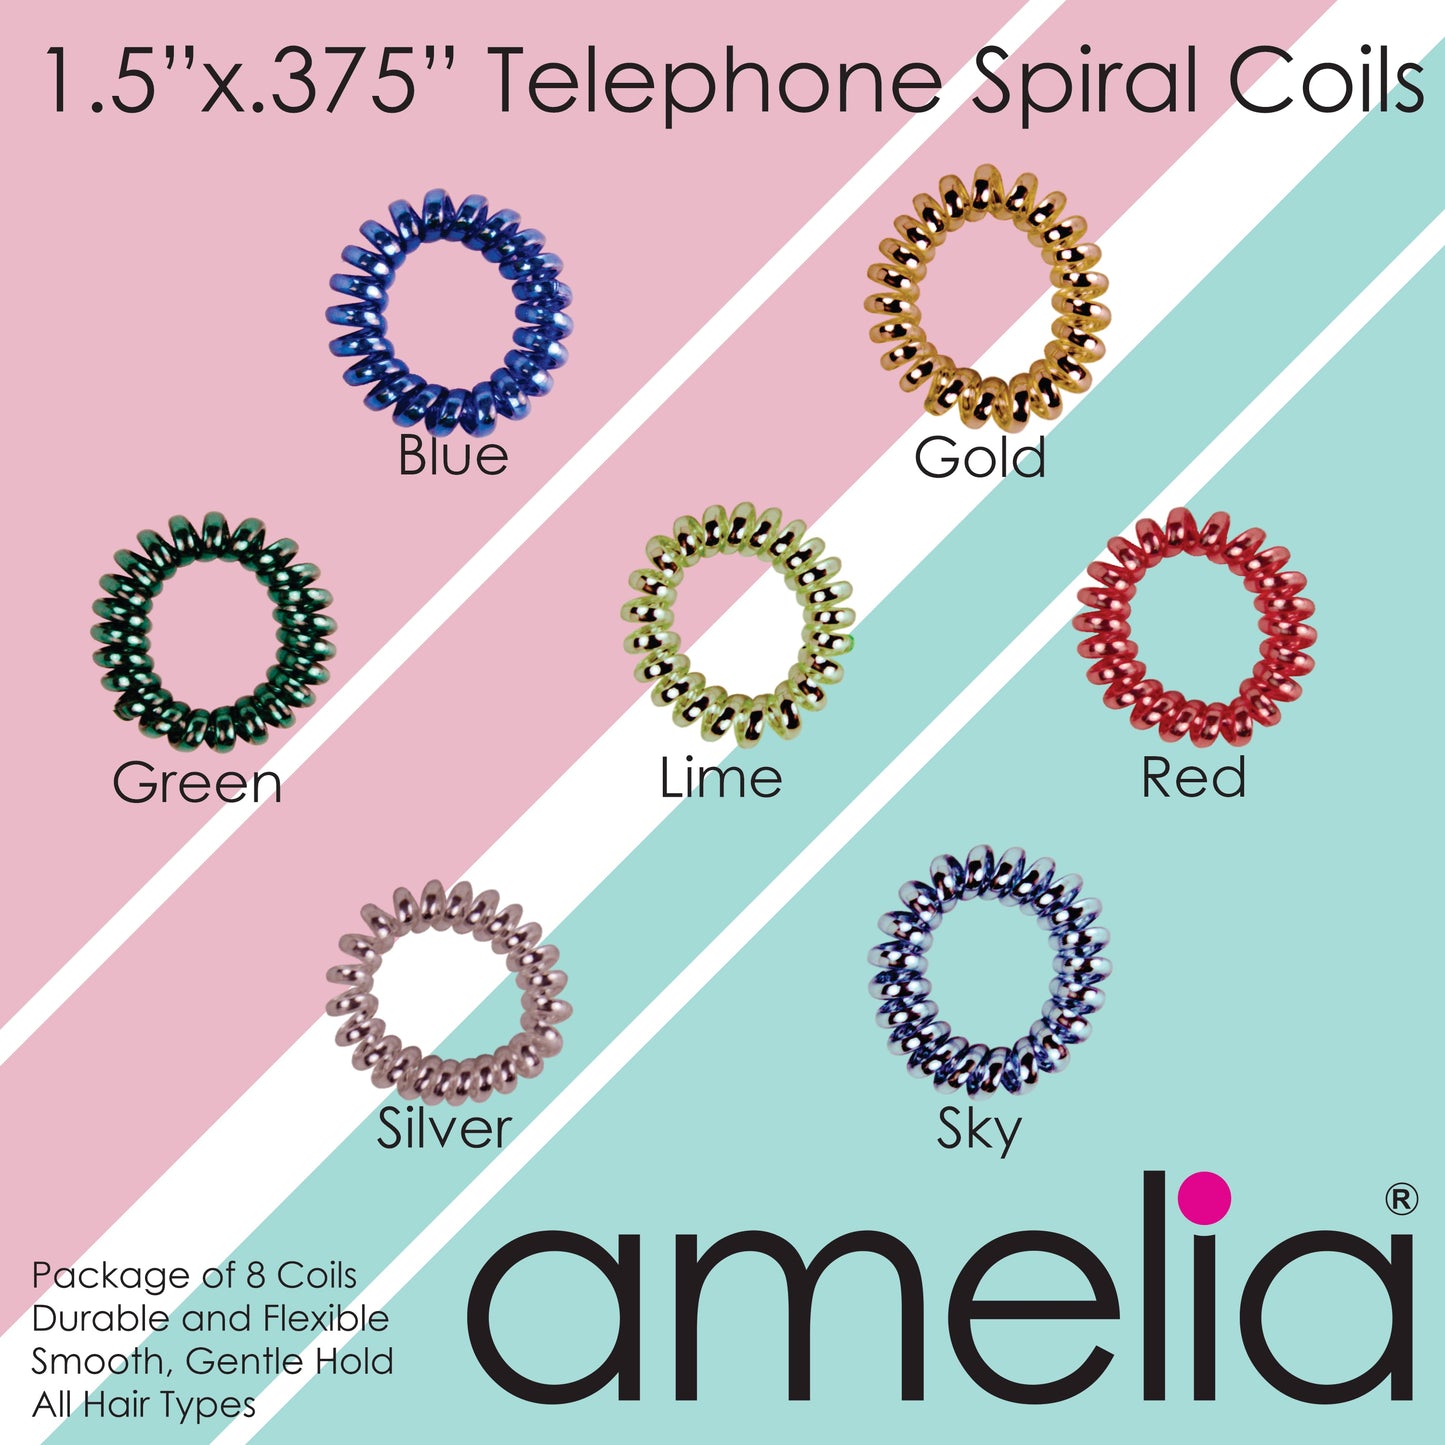 Amelia Beauty, 8 Small Shinny Elastic Hair Telephone Cord Coils, 1.5in Diameter Spiral Hair Ties, Strong Hold, Gentle on Hair, Lime Green